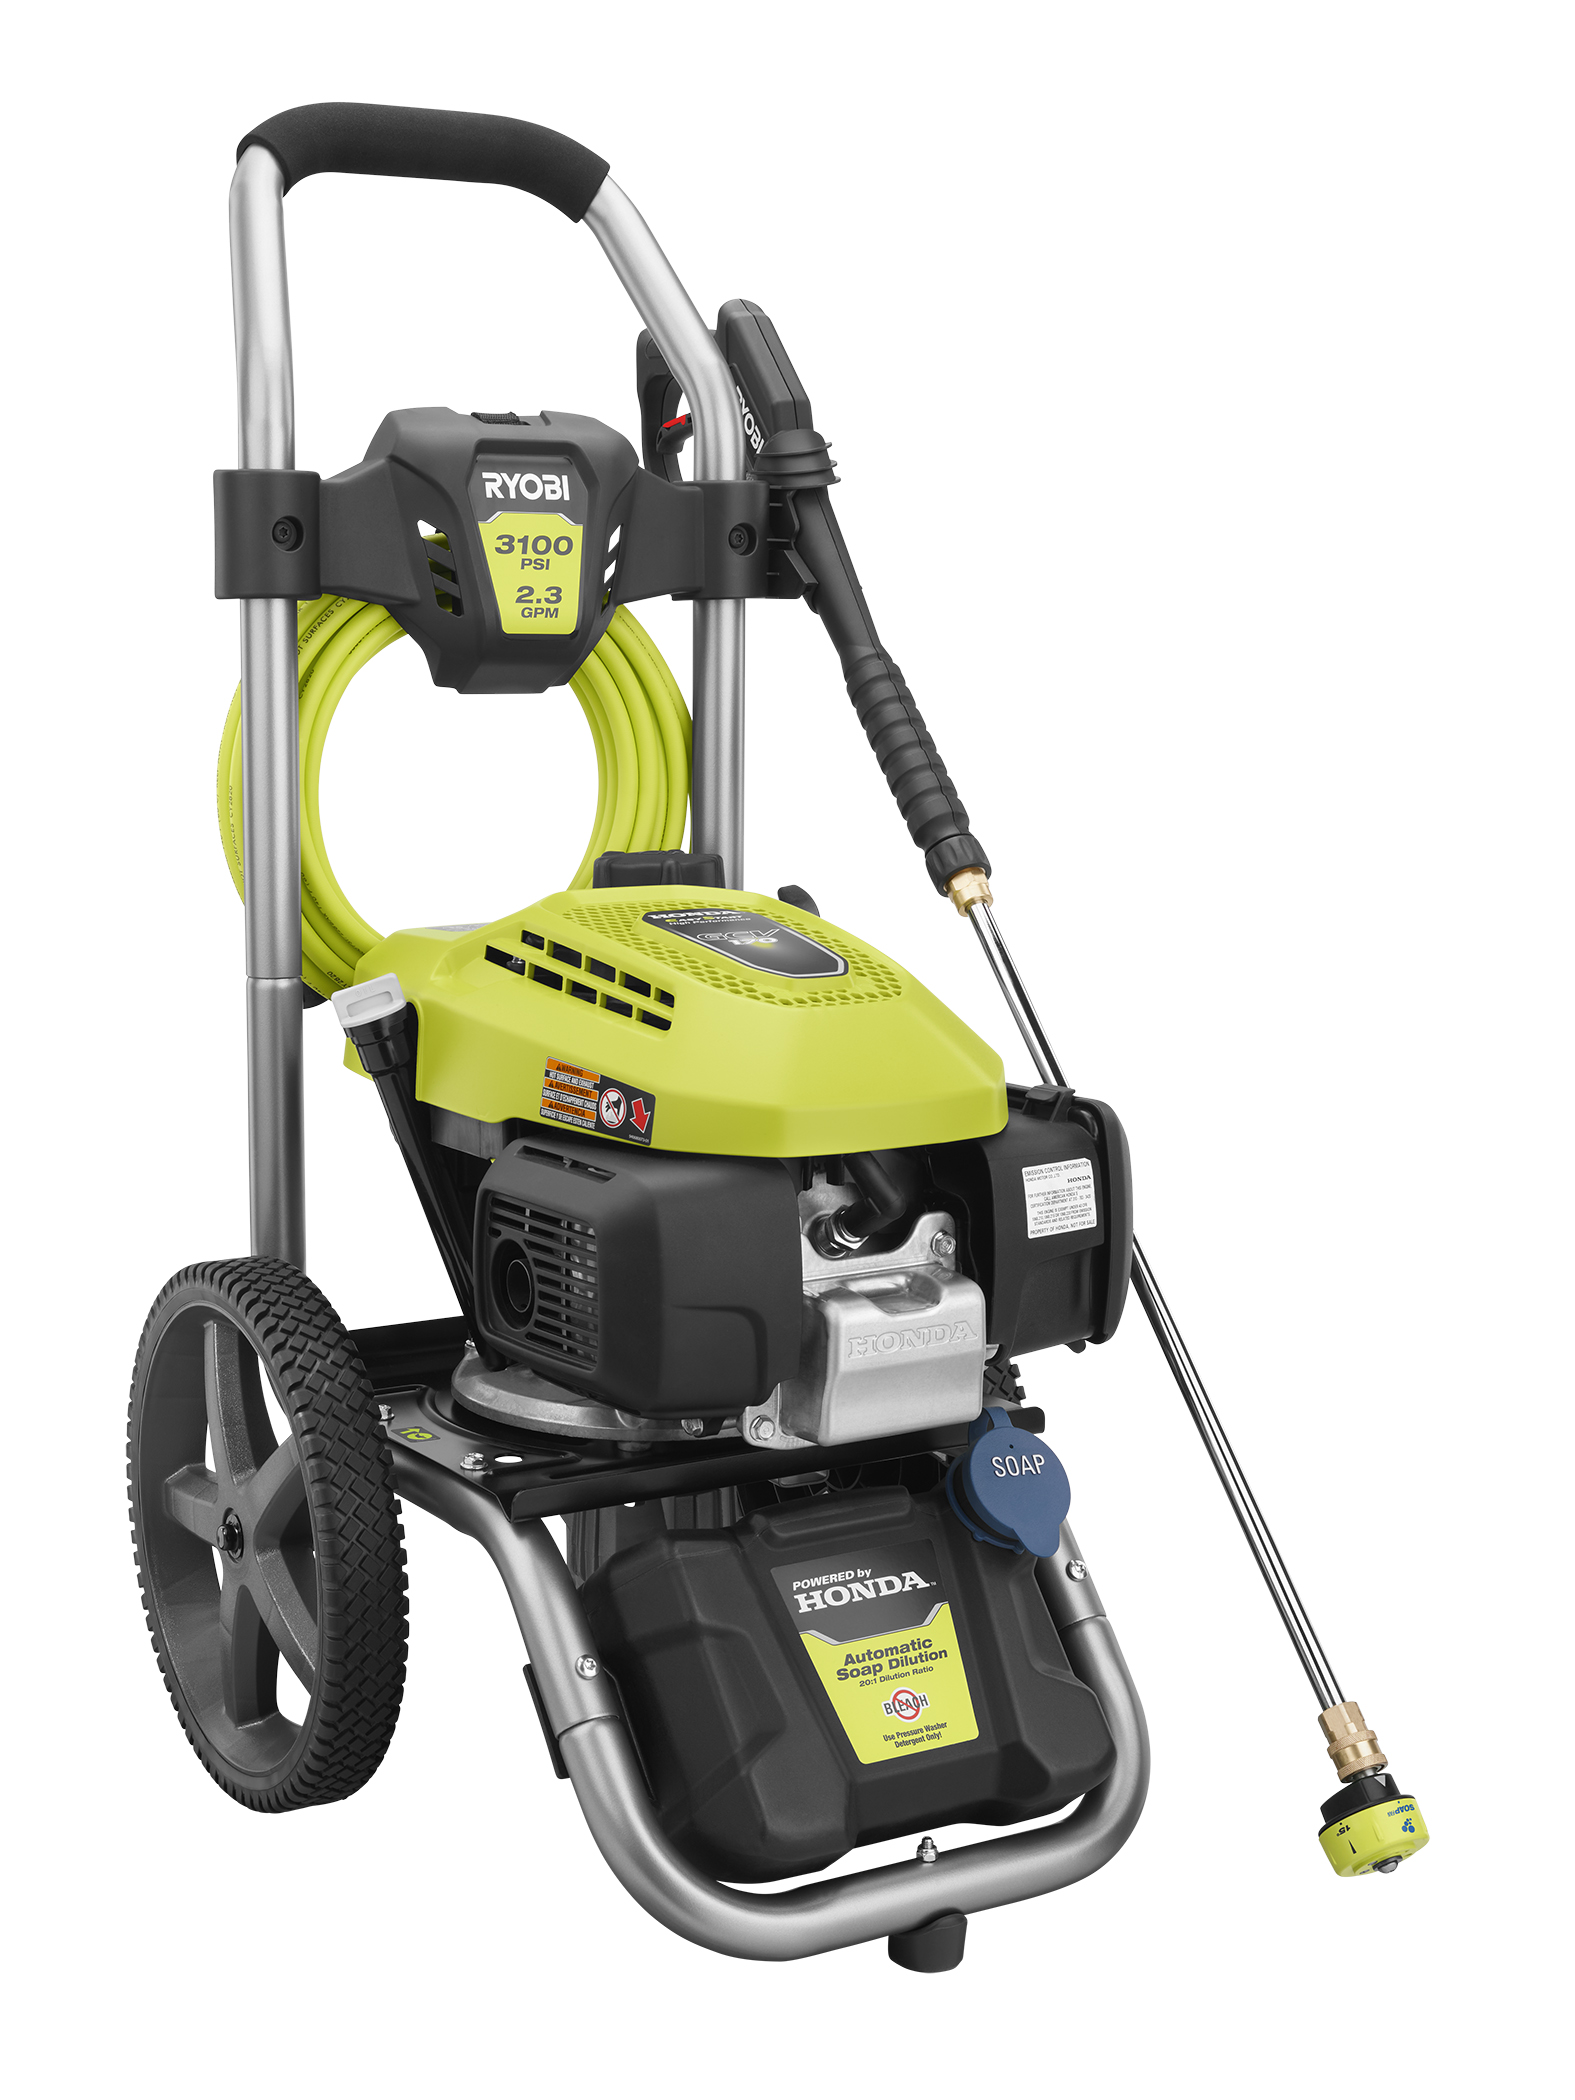 3100 PSI 2.3 GPM Cold Water Gas Pressure Washer - RYOBI Tools